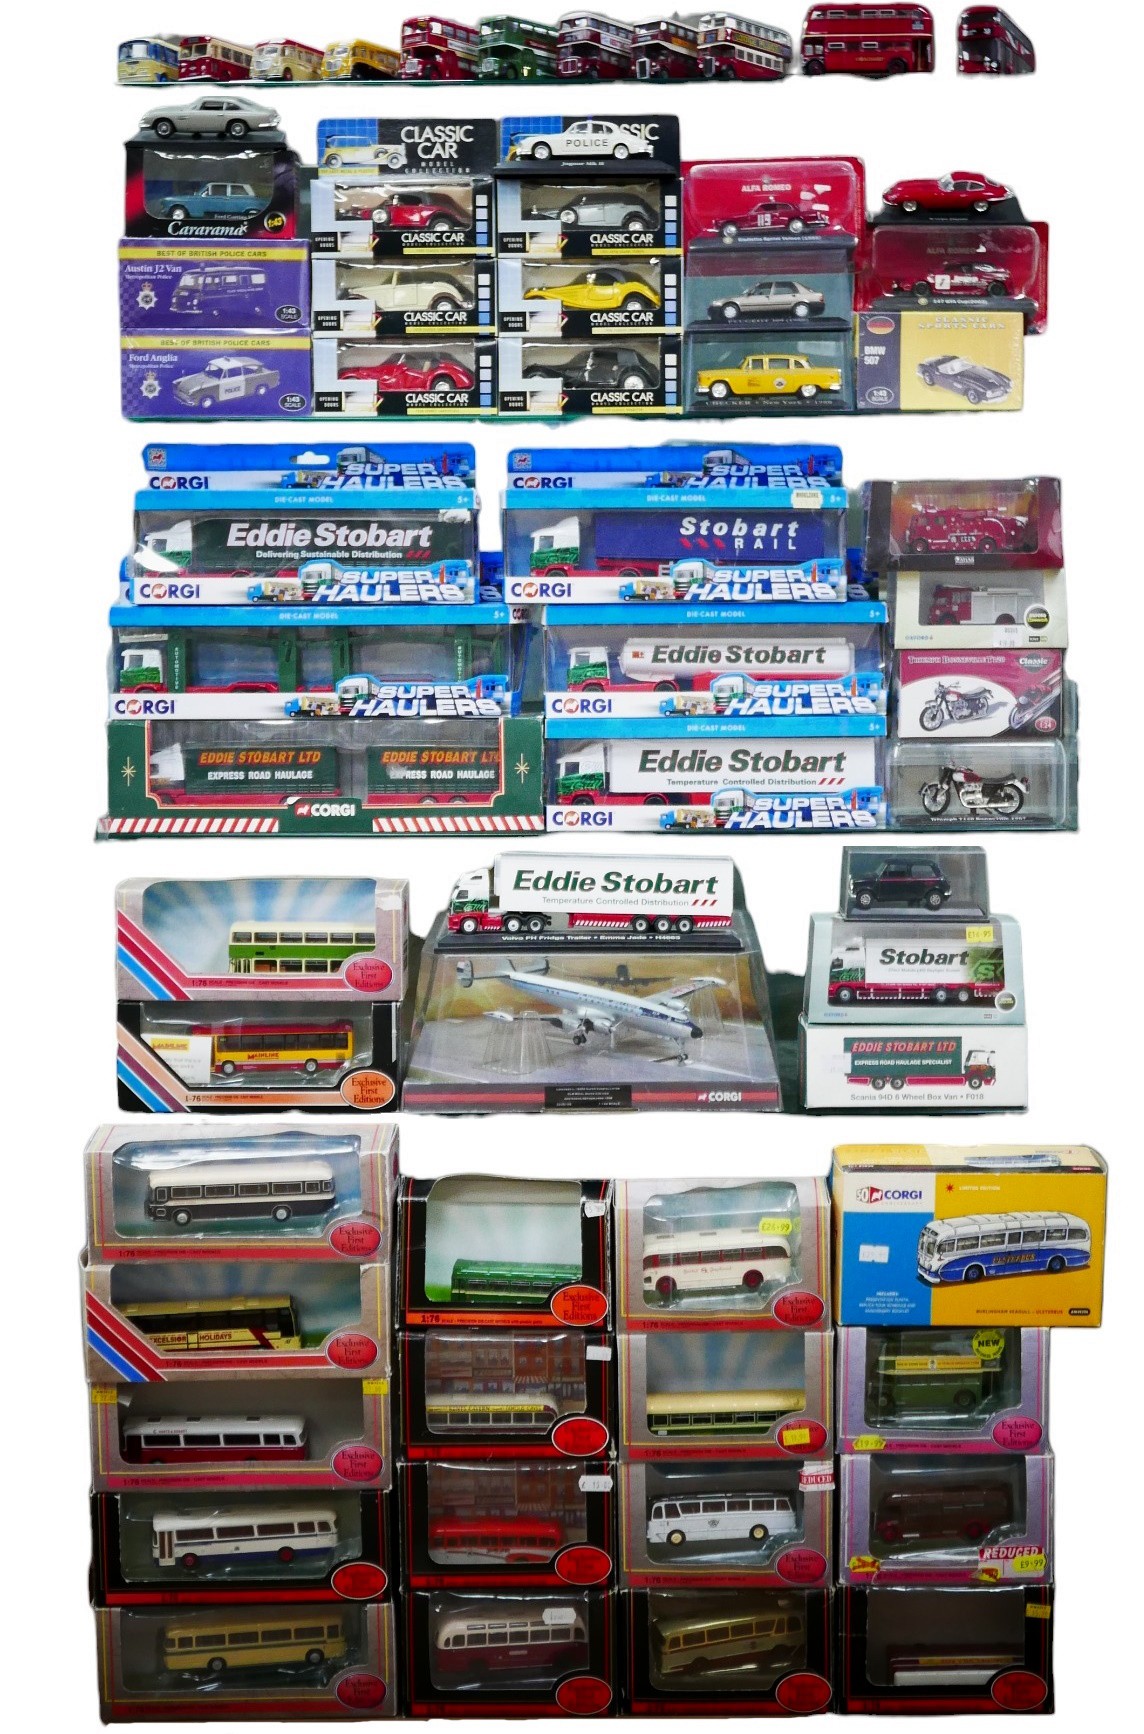 A collection of over fifty model buses, lorries, cars, and a plane from Exclusive First Editions (